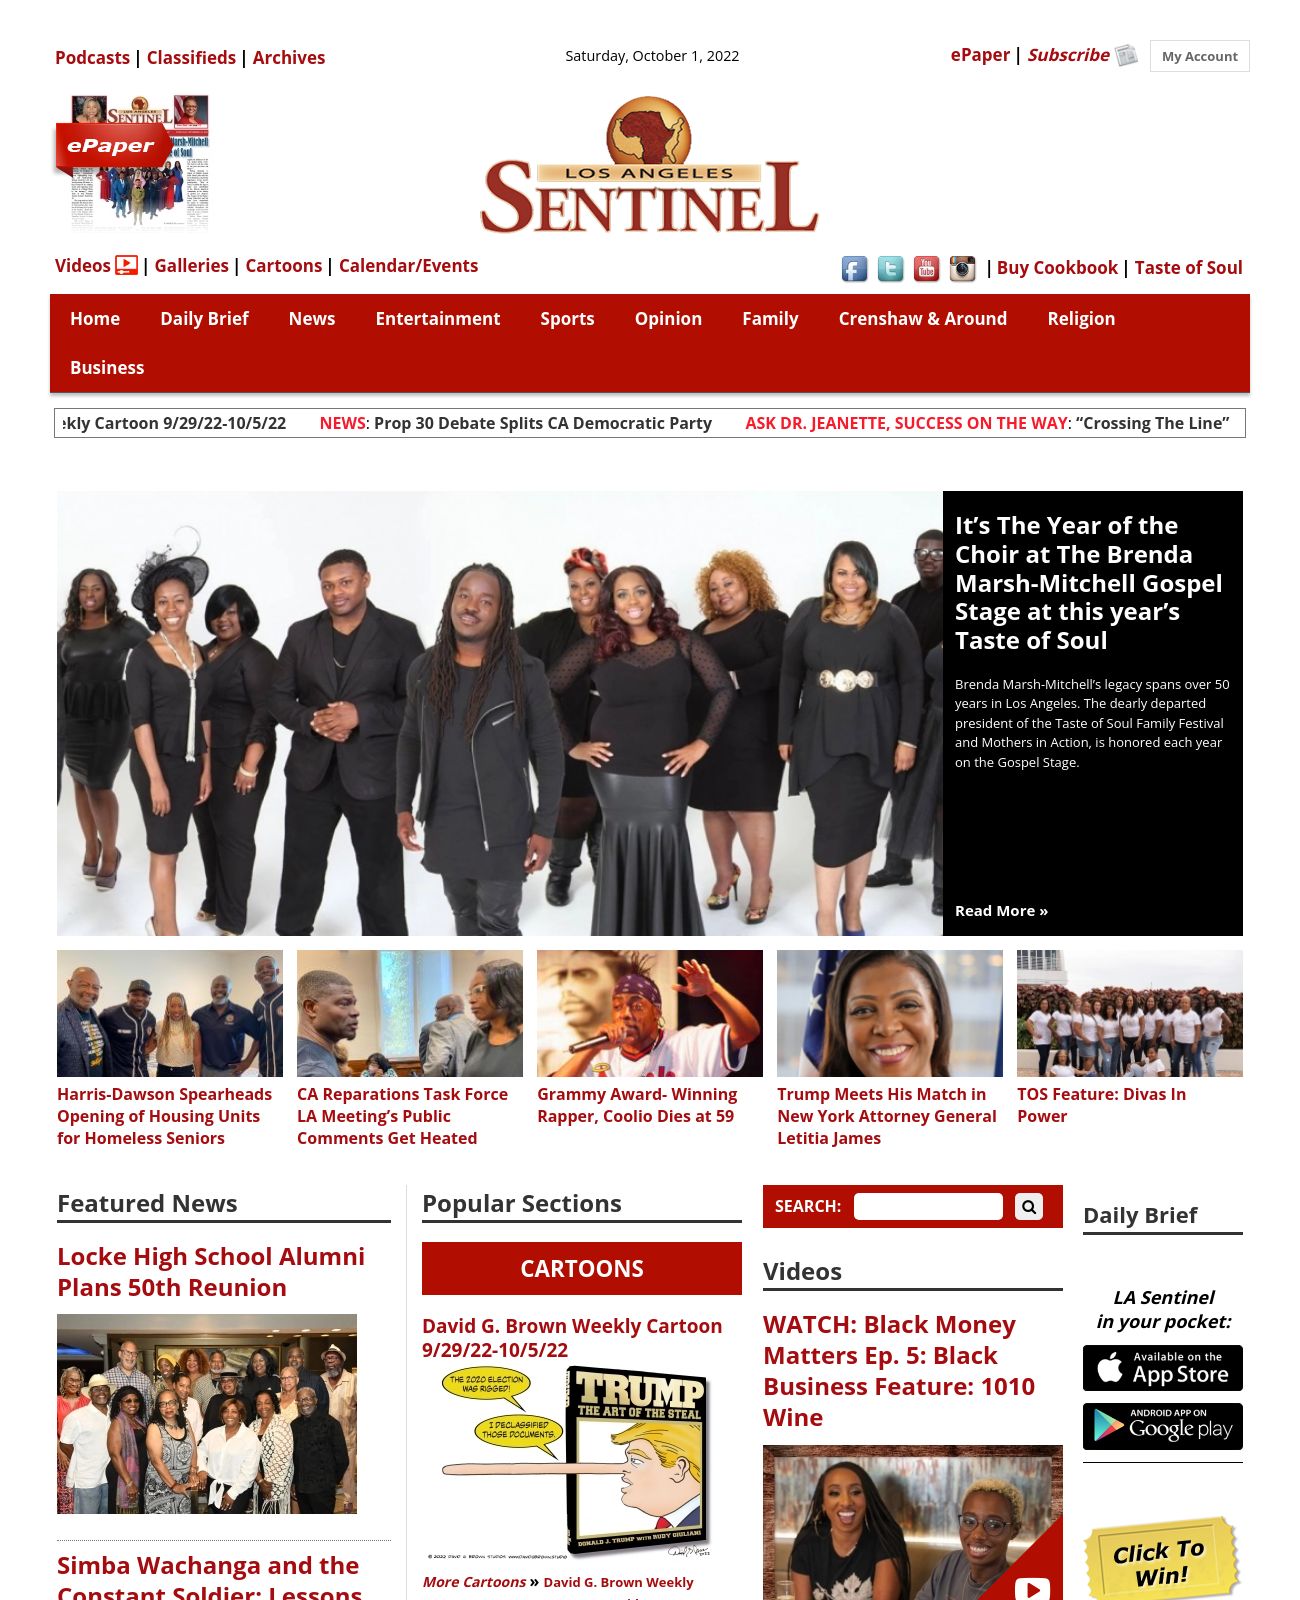 Los Angeles Sentinel at 2022-10-01 12:38:52-07:00 local time